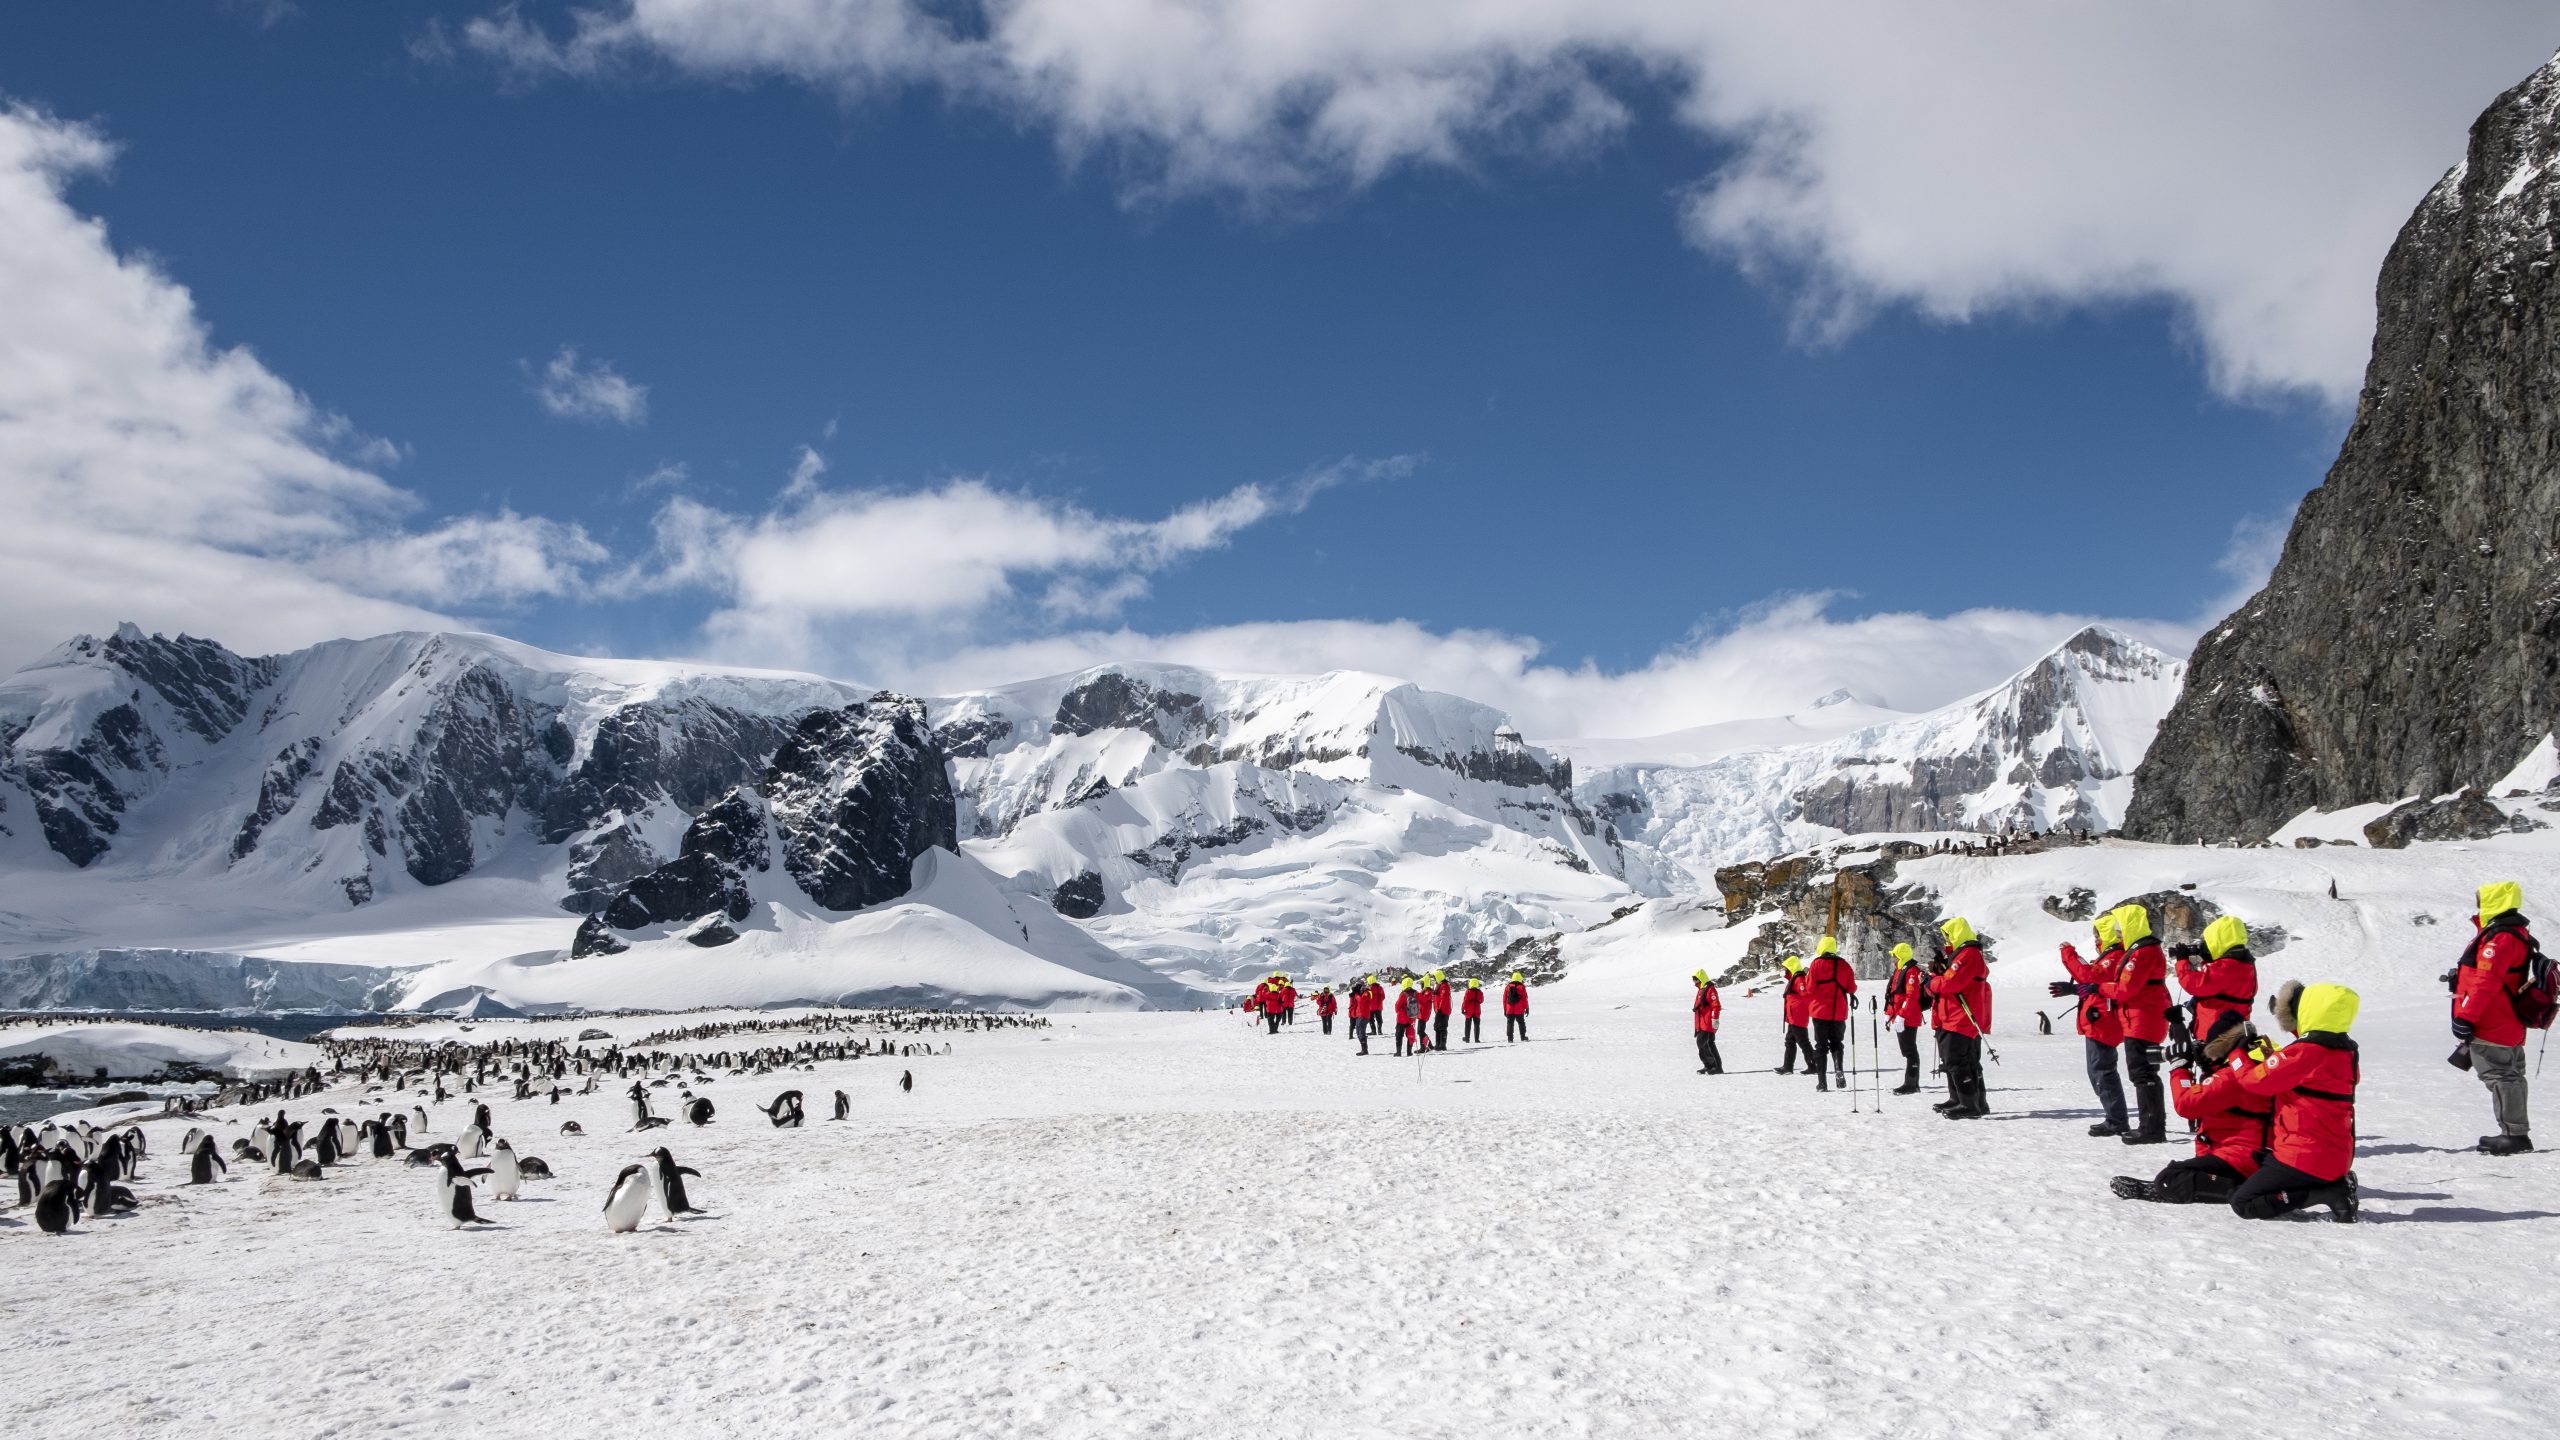 See Antarctica in all-inclusive Hurtigruten Expeditions including flights and hotels